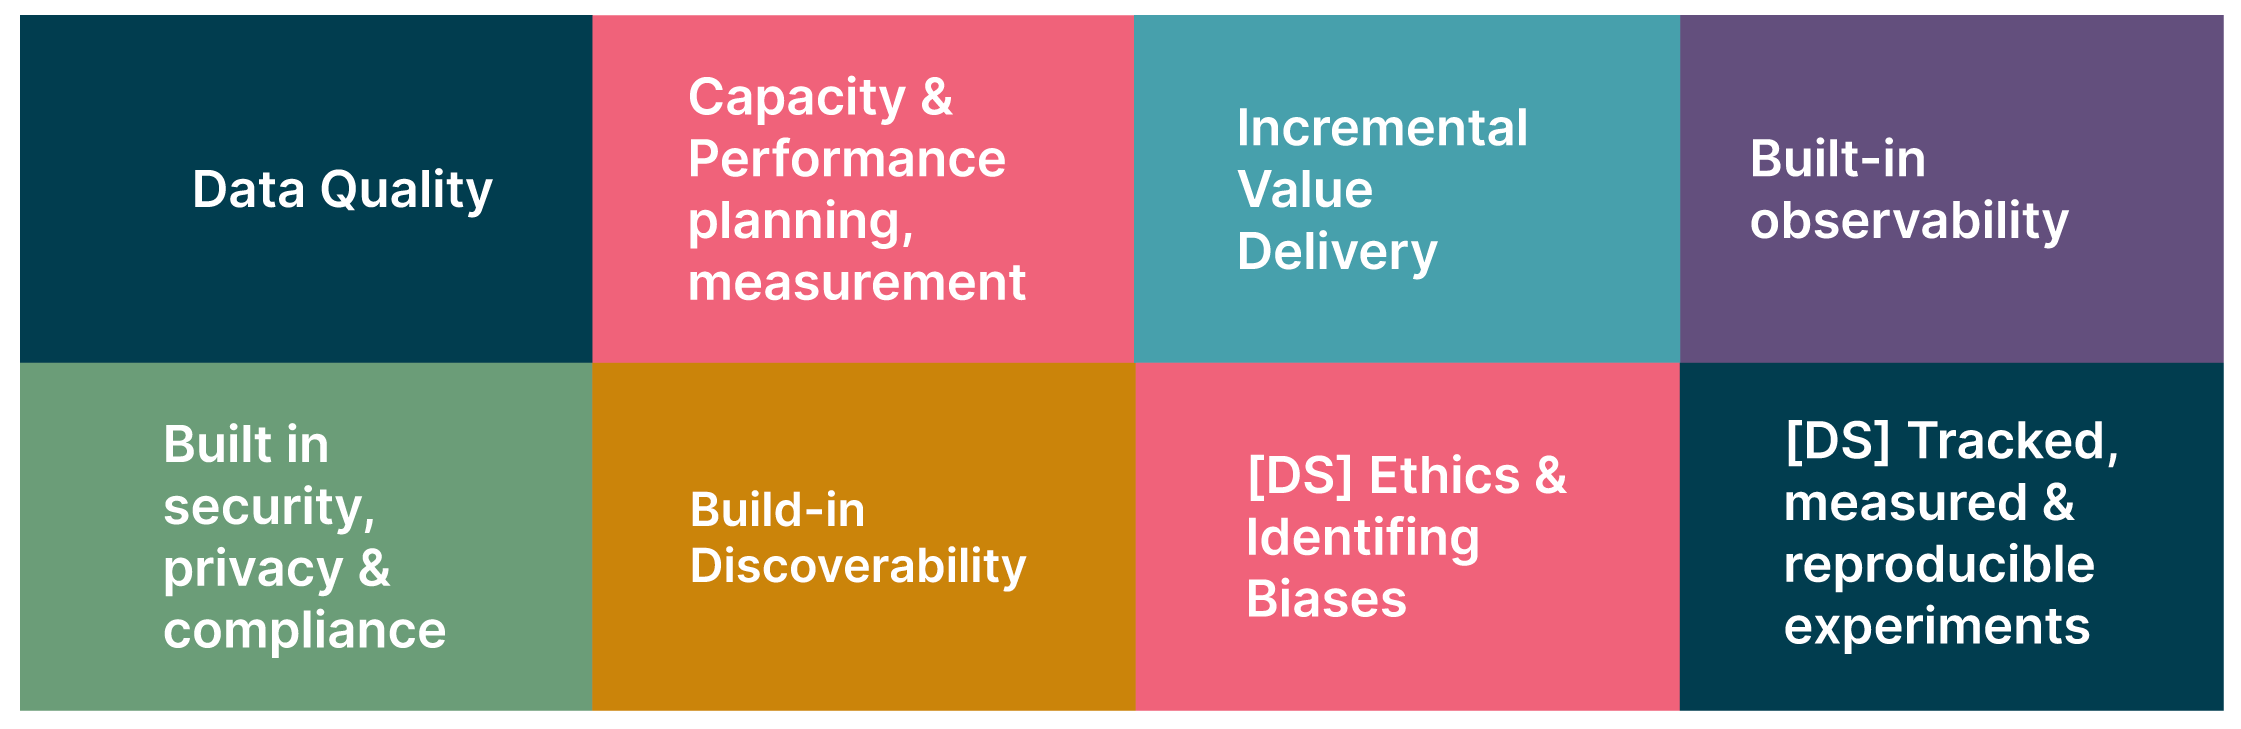 This diagram shows 8 data default practices. They are data quality; capacity and performance planning, measurement; Incremental value delivery; built in observability; Built in security, privacy and compliance, build-in discoverability, Data science: Ethics and identifying biases, Data science tracked measured and reproducible experiments.